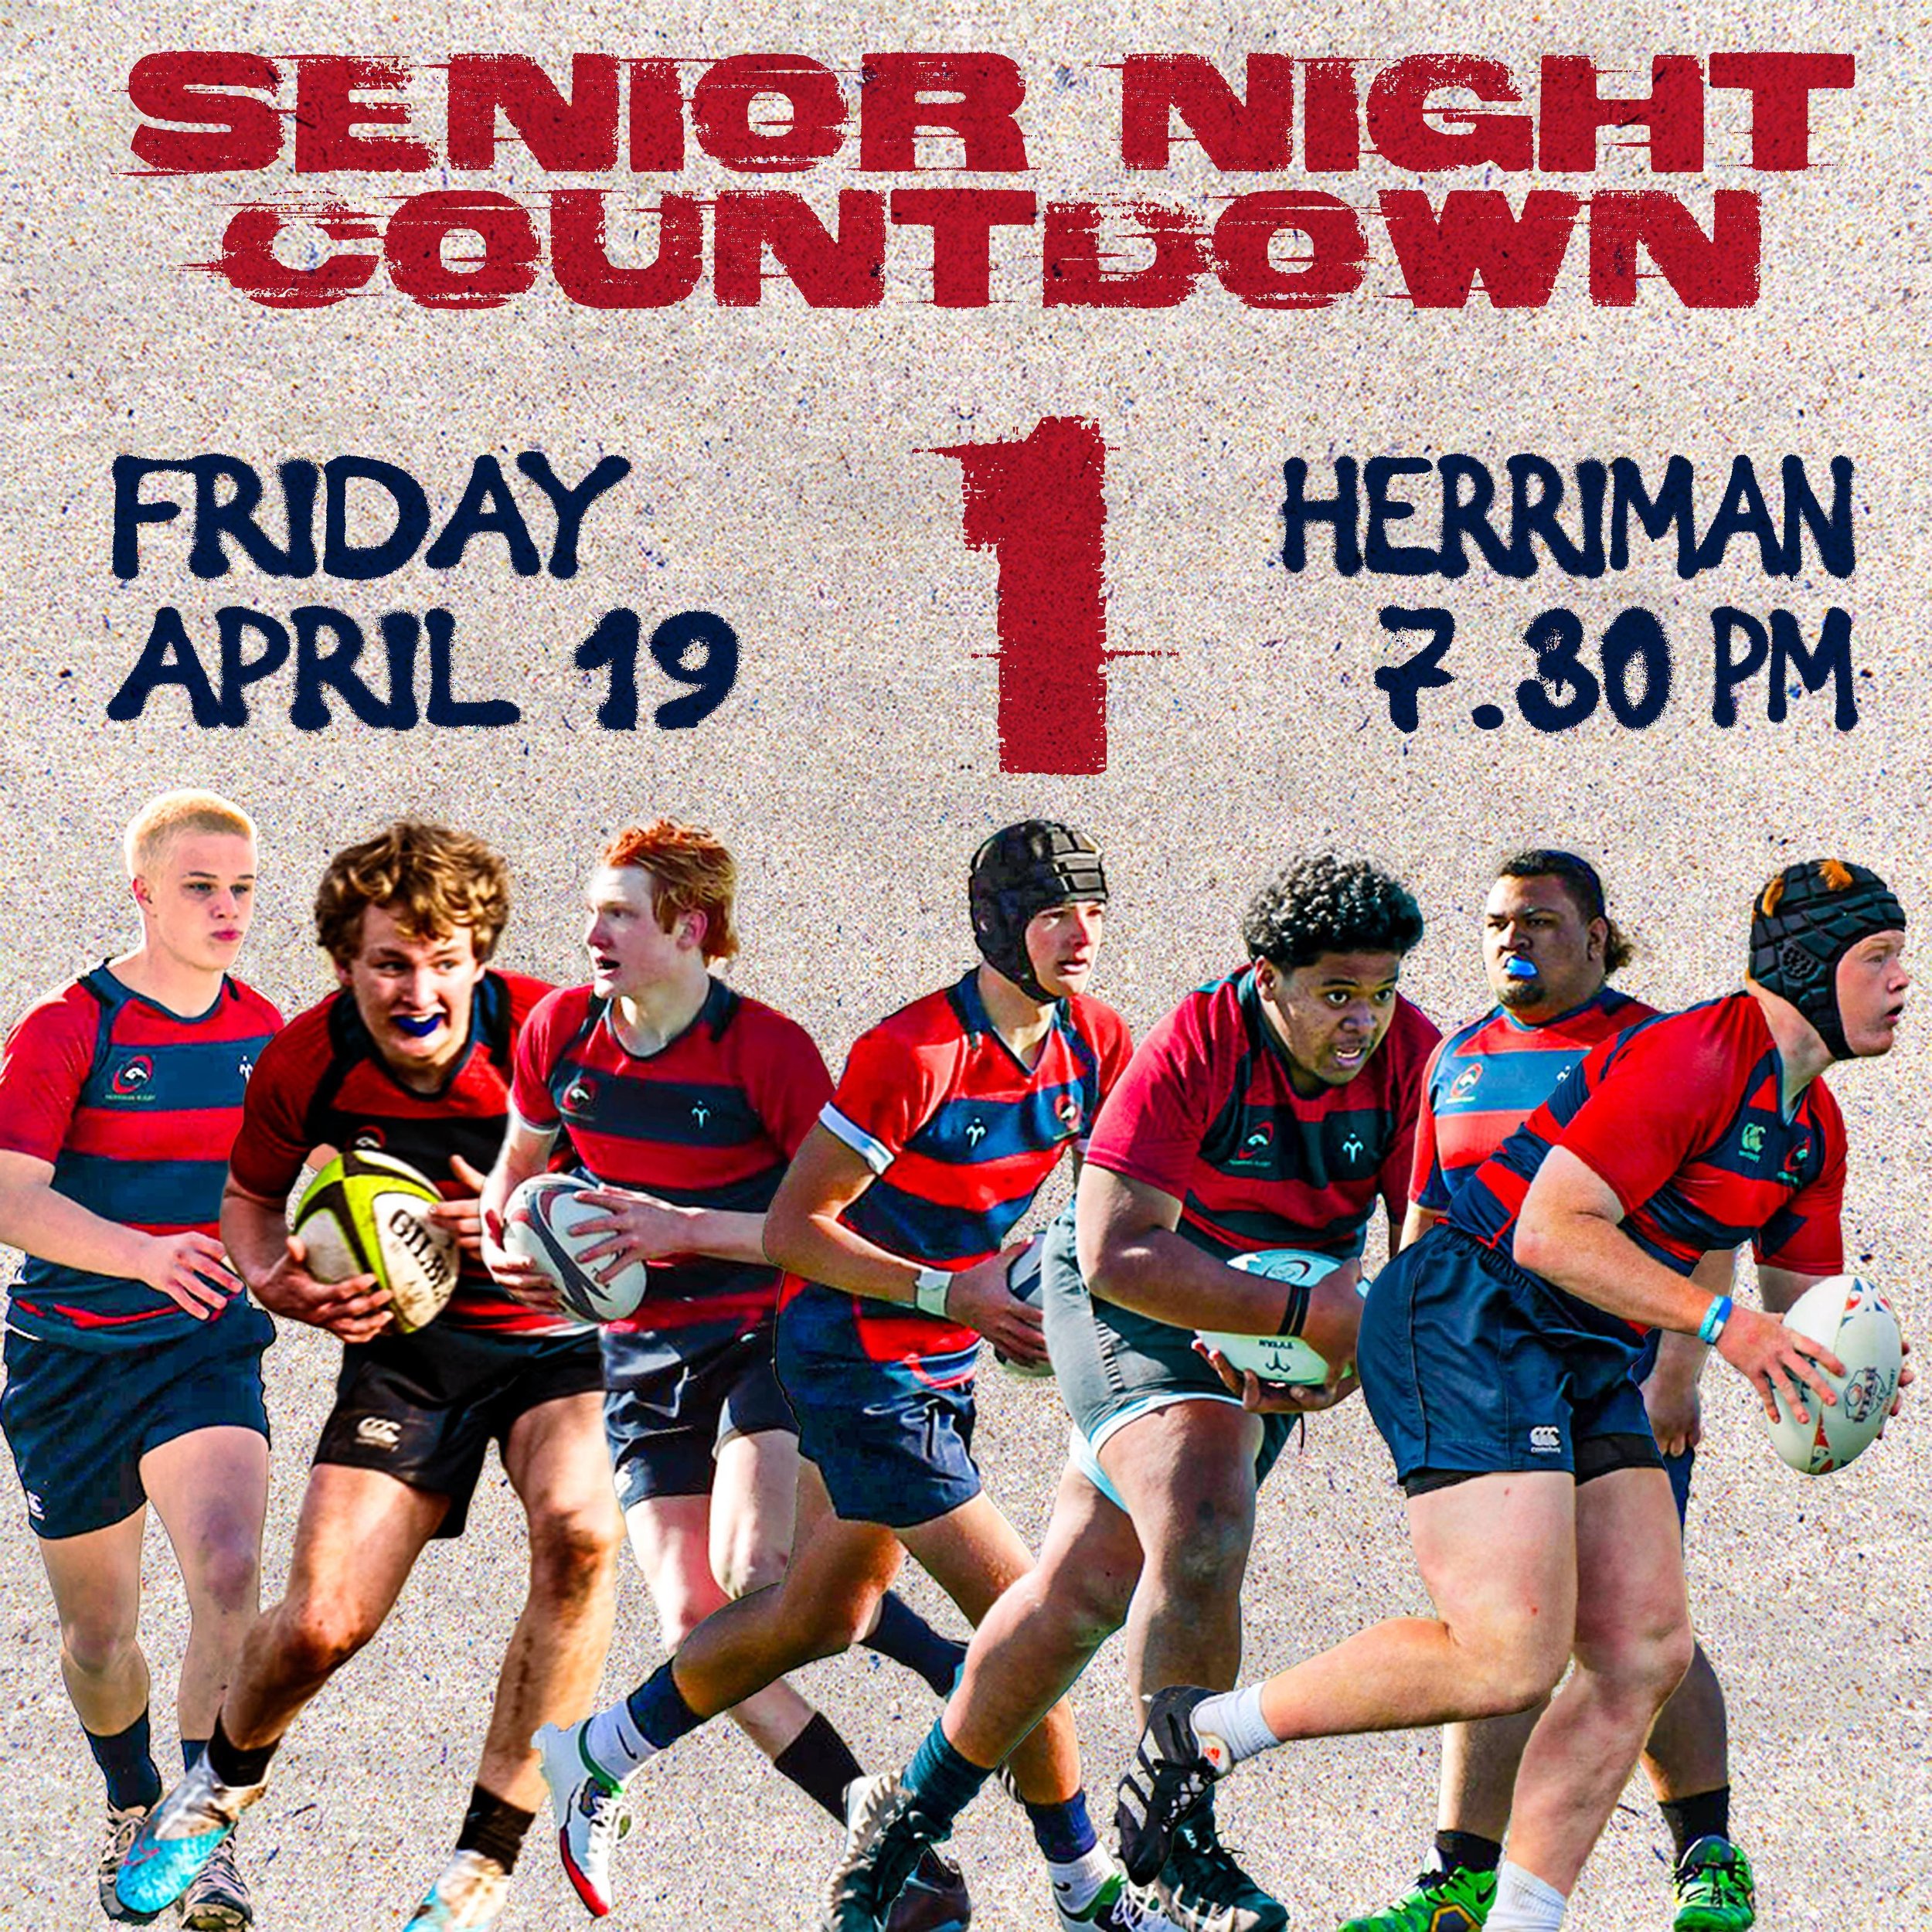 Tomorrow is the day!

Clear the schedule. Cancel your plans. Be there at Herriman High School at 7:30 PM as we send our Seniors off. We promise you won&rsquo;t want to miss it. See you then!